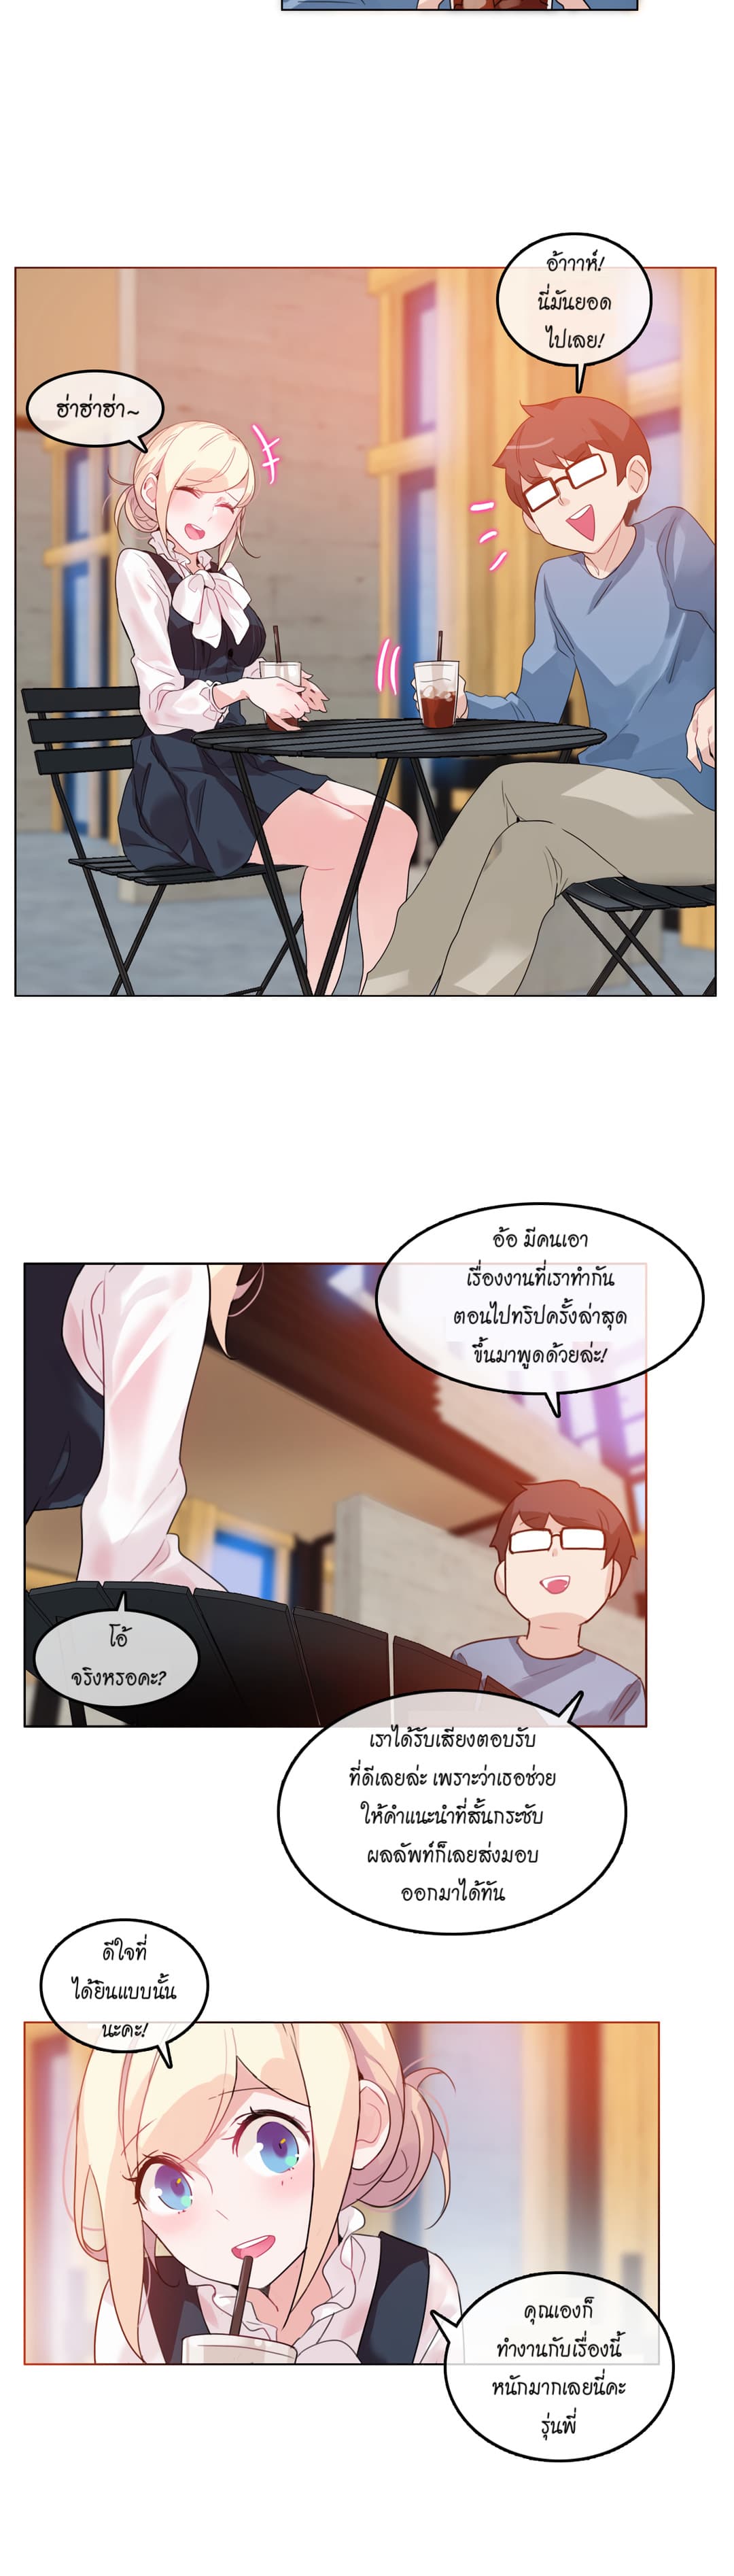 A Pervert’s Daily Life 23 (6)